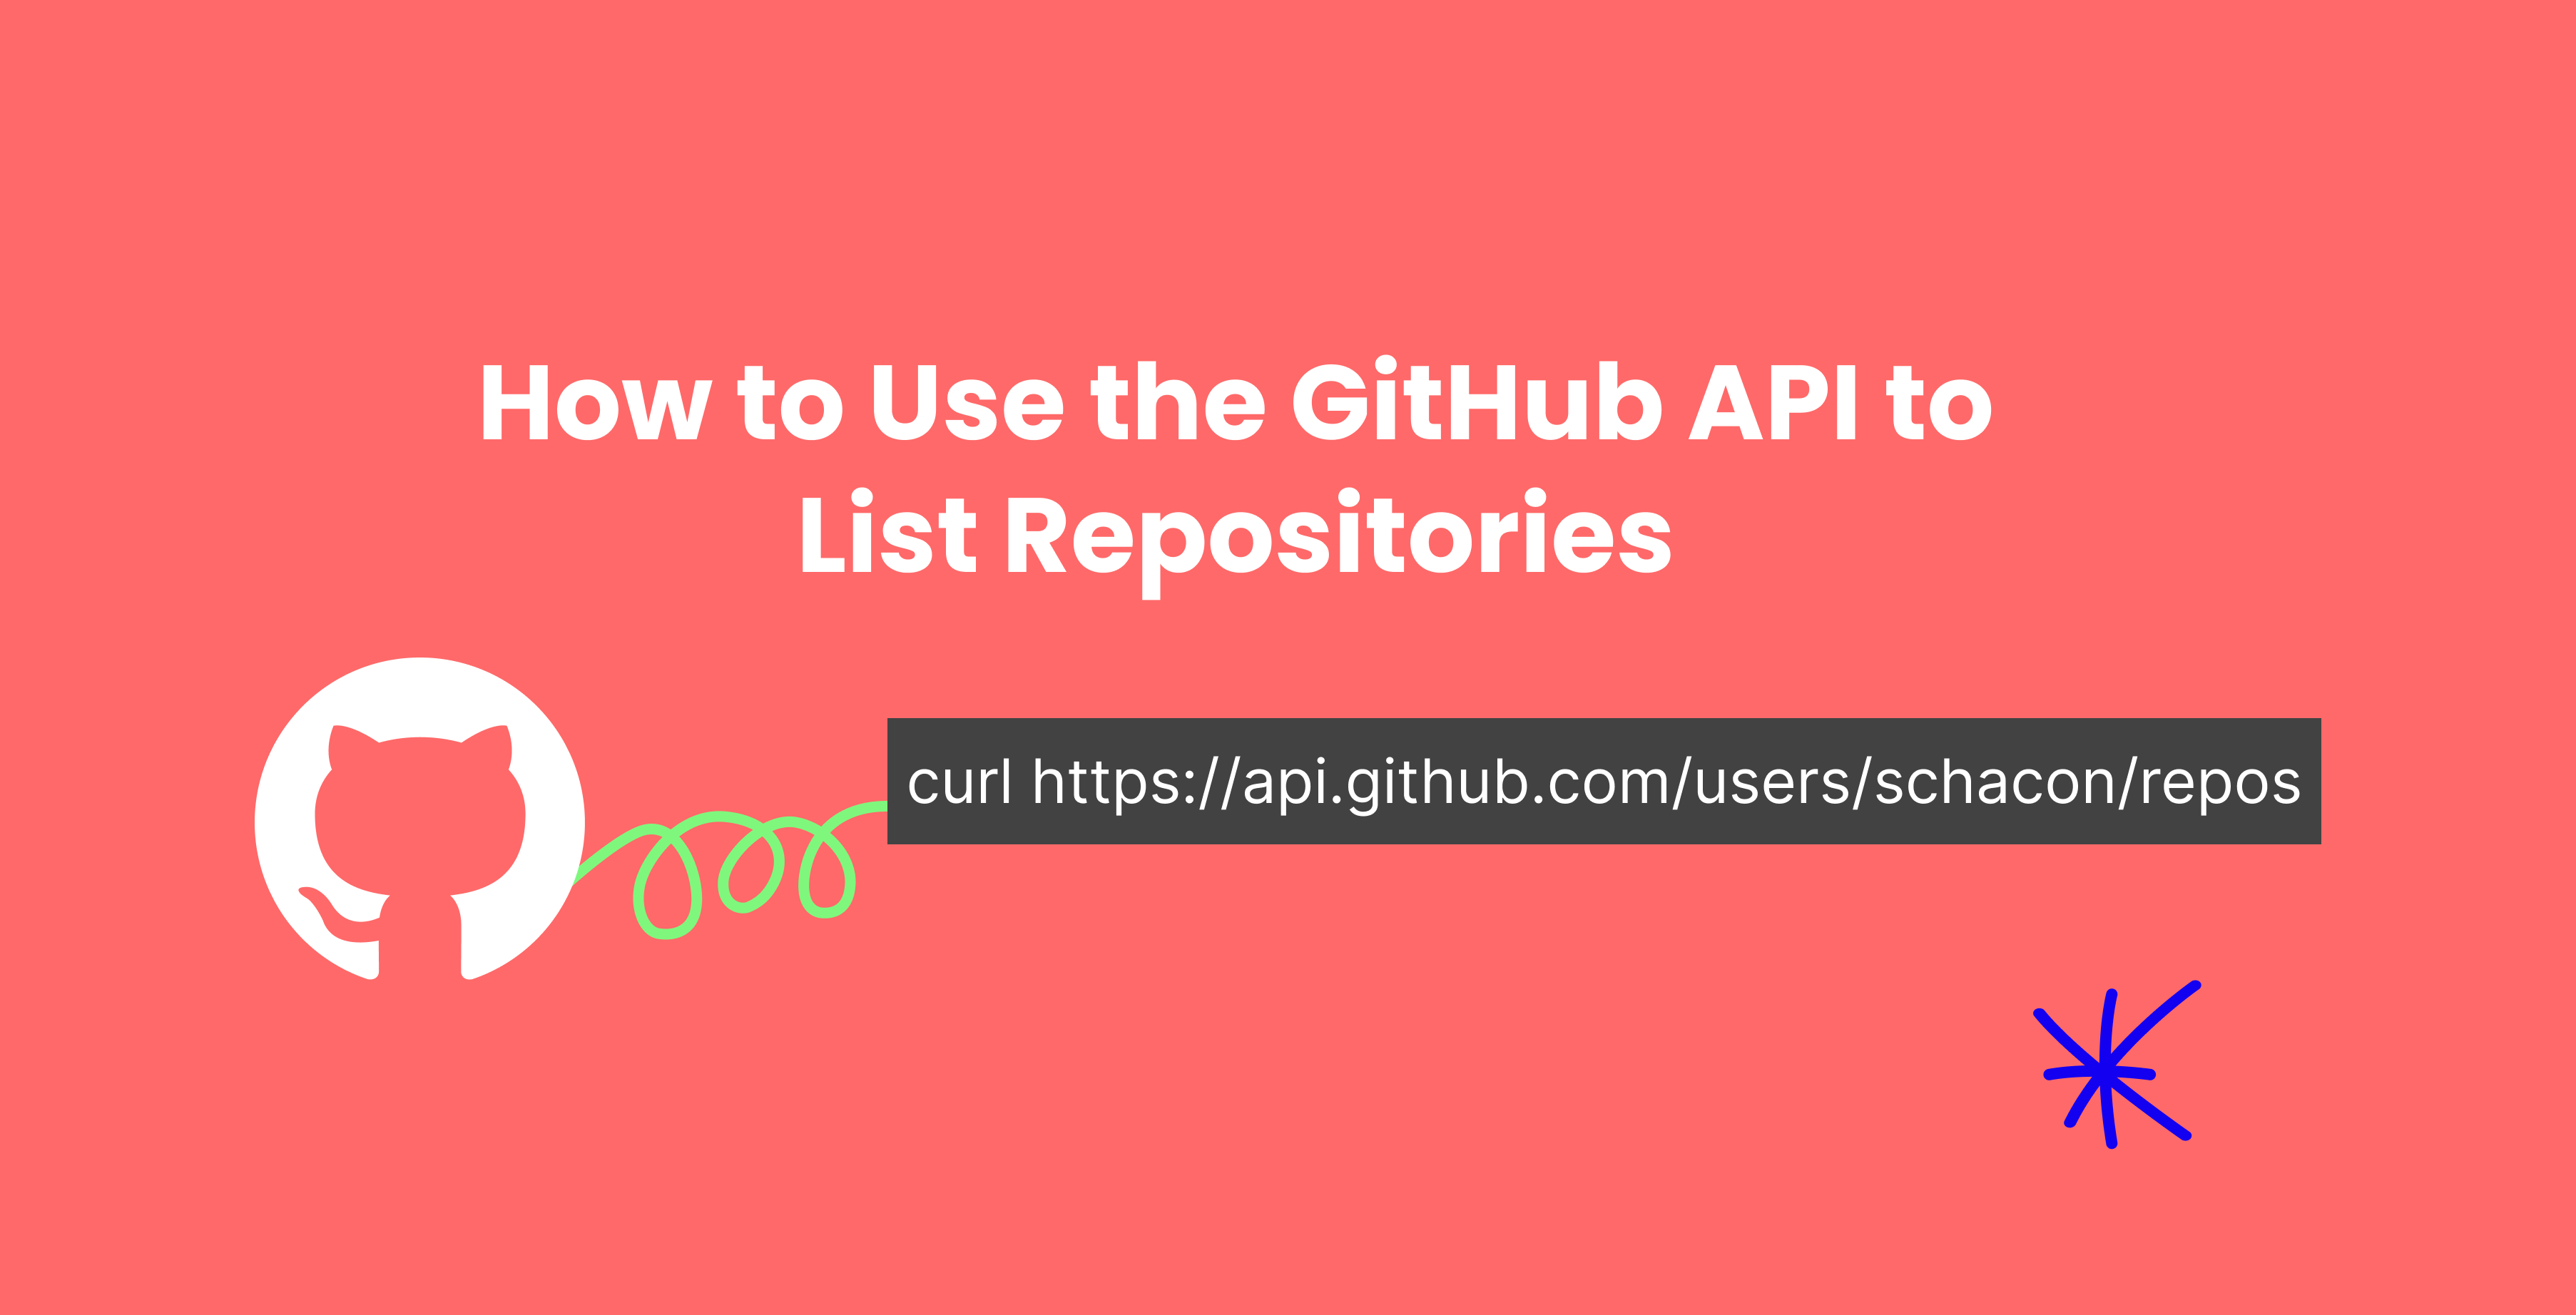 How to Use the GitHub API to List Repositories